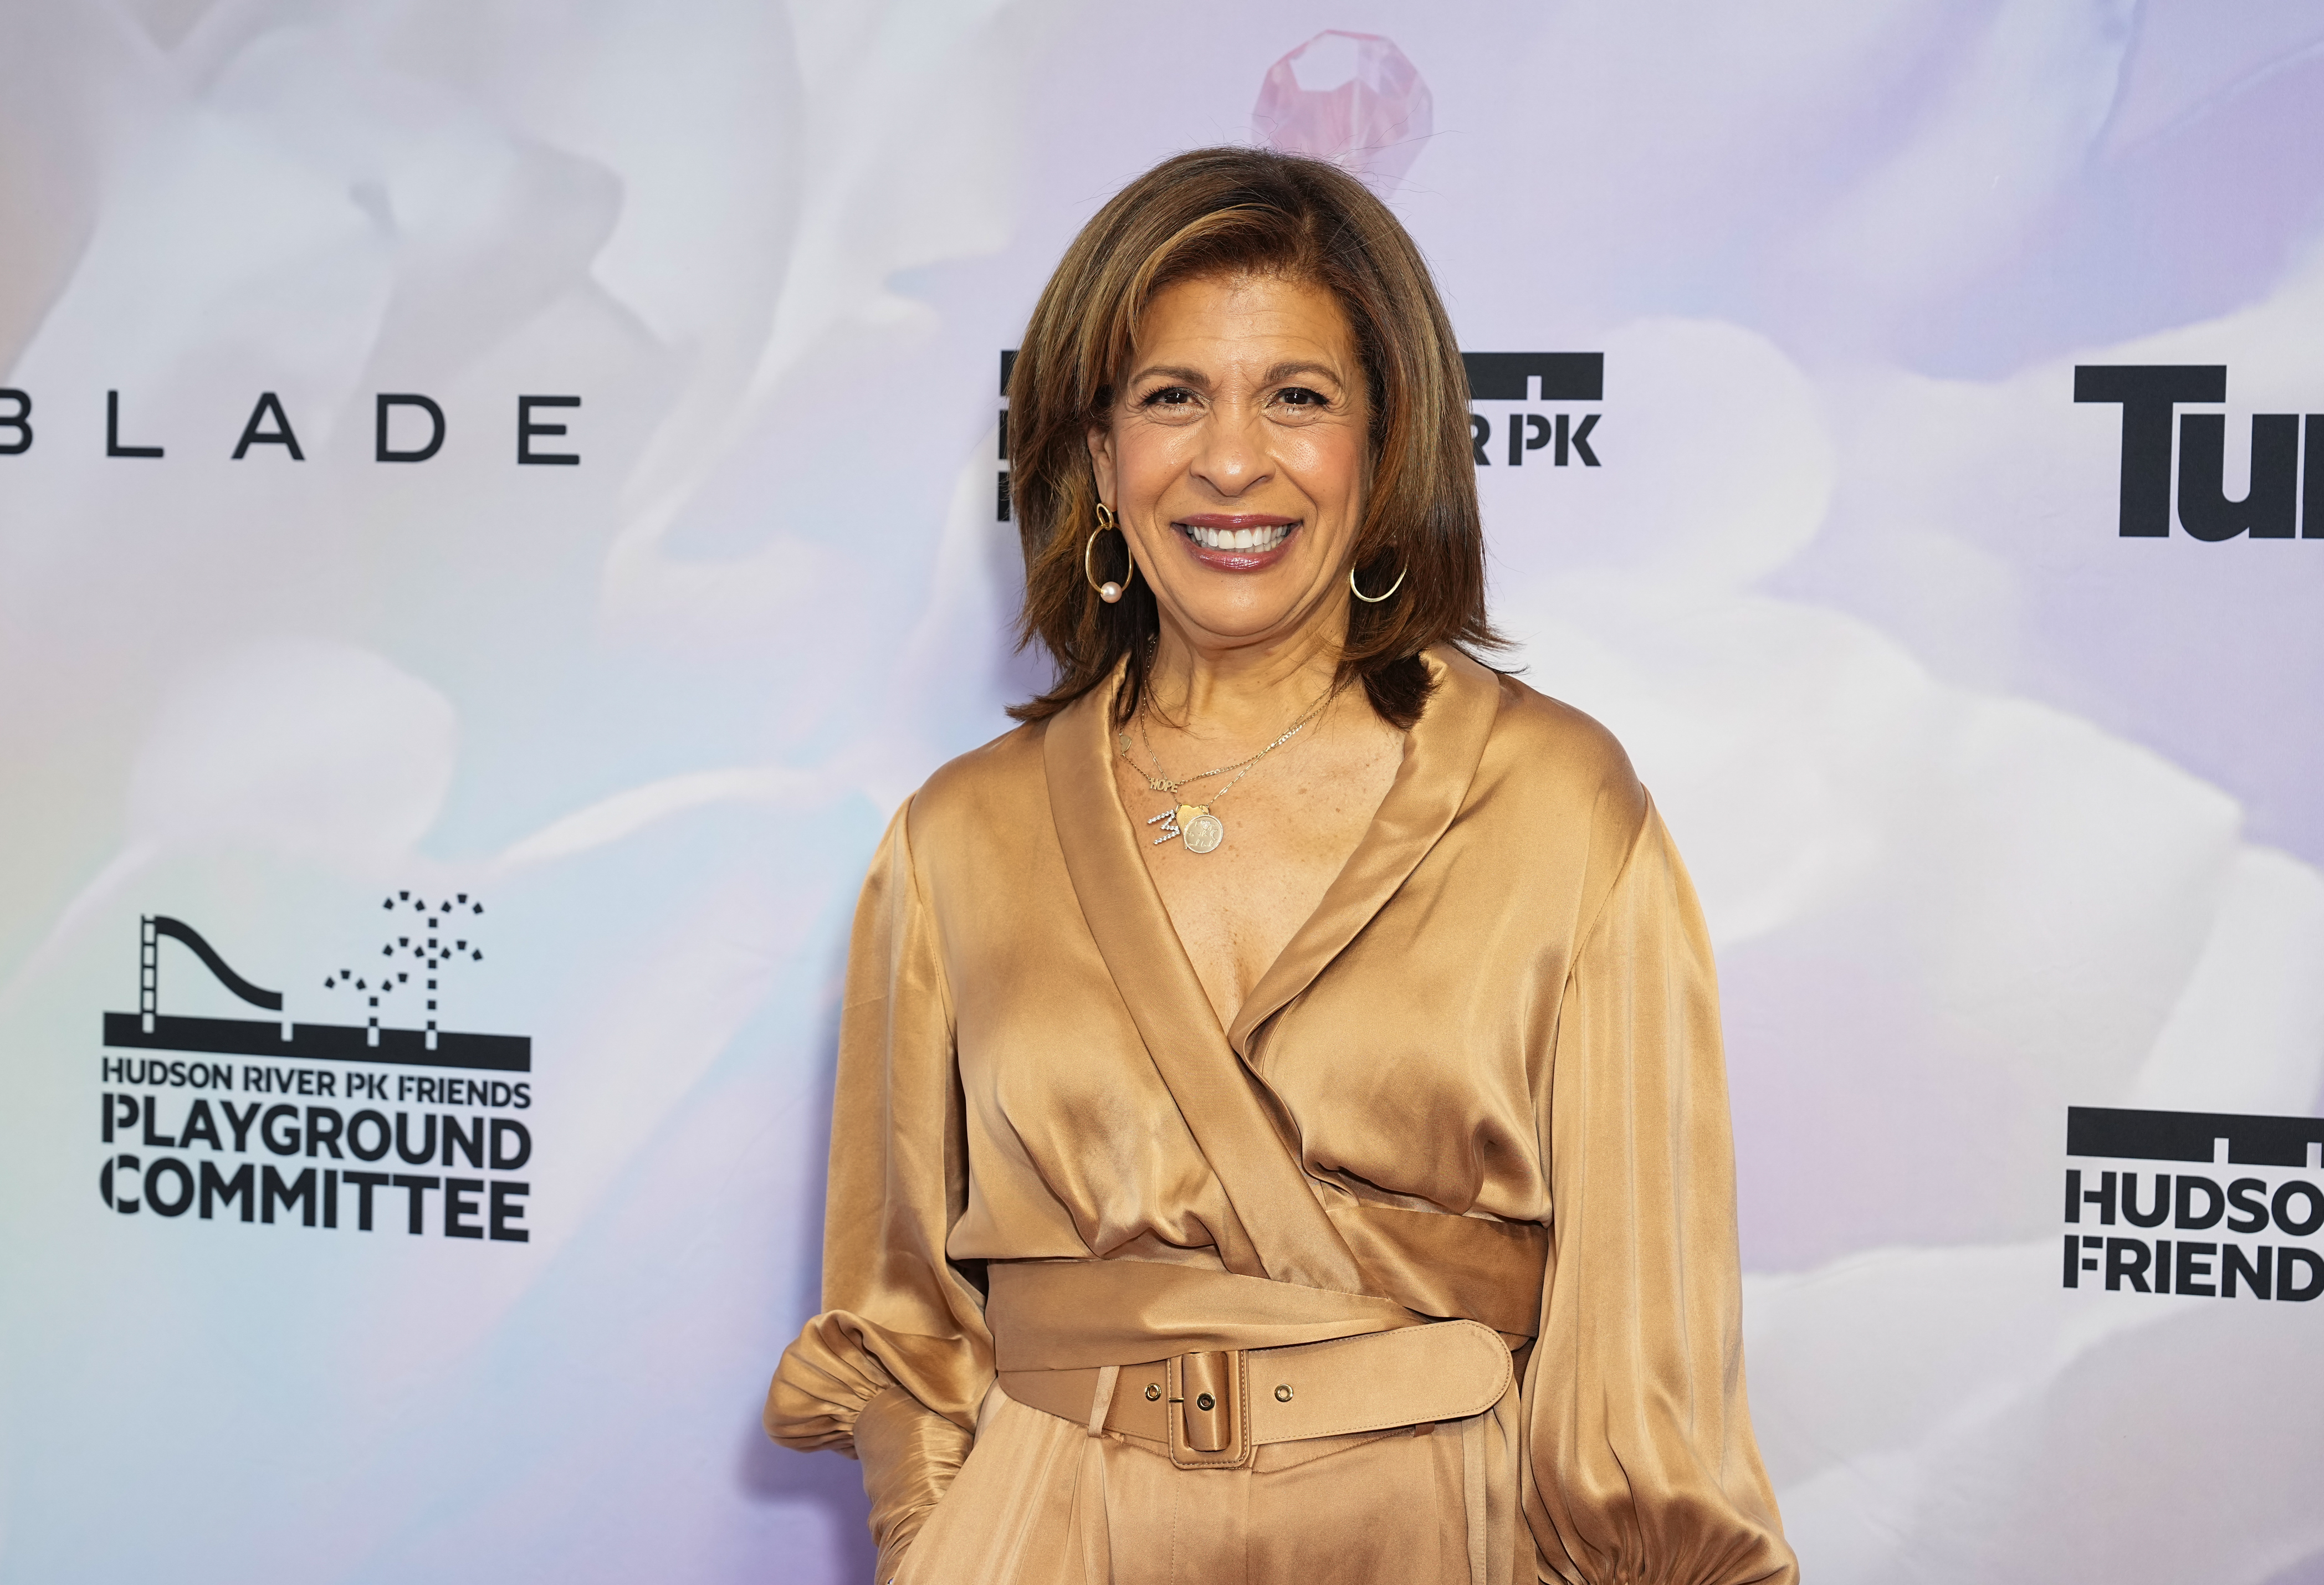 Hoda Kotb at the Hudson River Park Friends 8th Annual Playground Committee Luncheon in New York in 2024 | Source: Getty Images